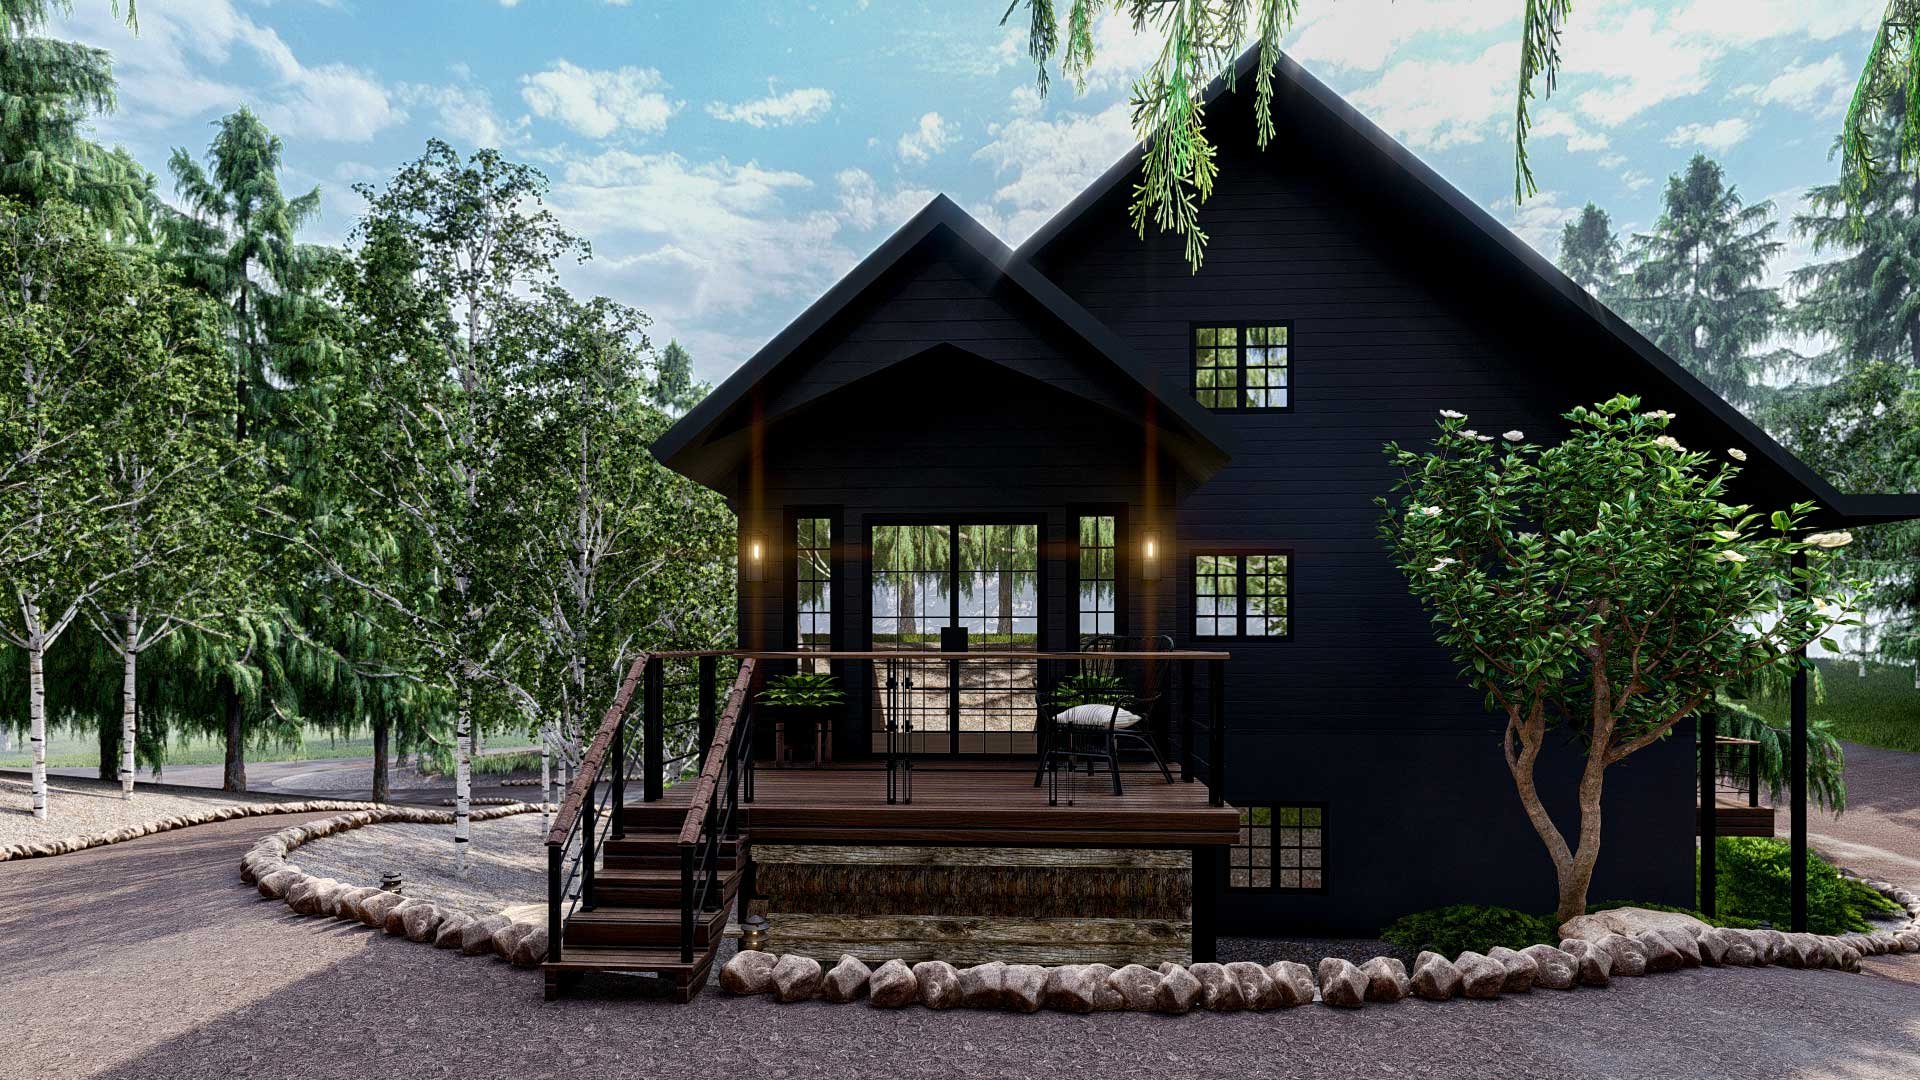  Rich brown wood and midnight blue paint shrink the visual footprint of the house, allowing it to recede from the spotlight and allow the forested landscape to command attention. 